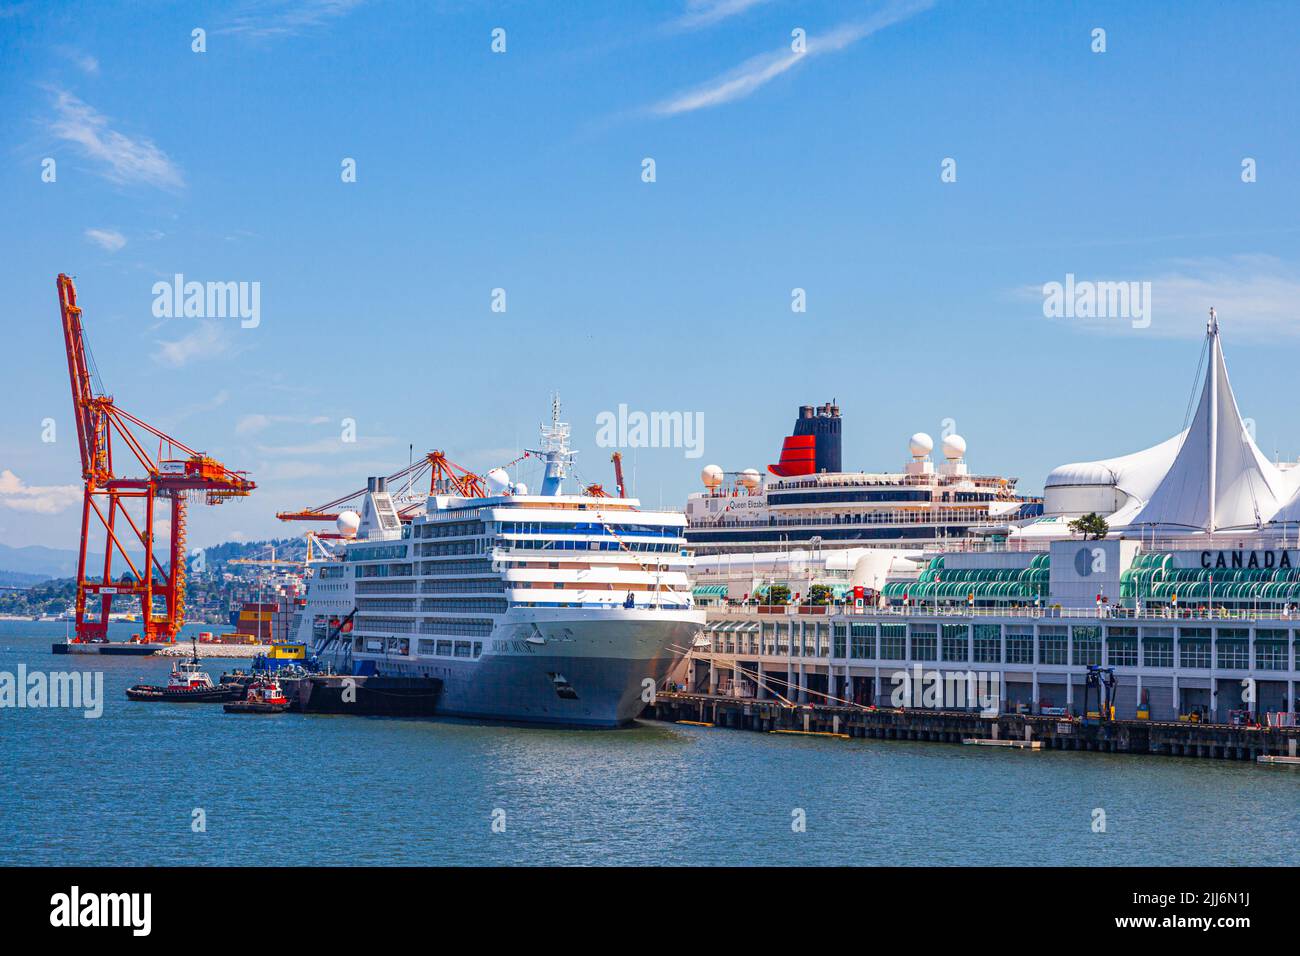 View of the Vancouver cruise ship terminal in British Columbia Canada Stock Photo